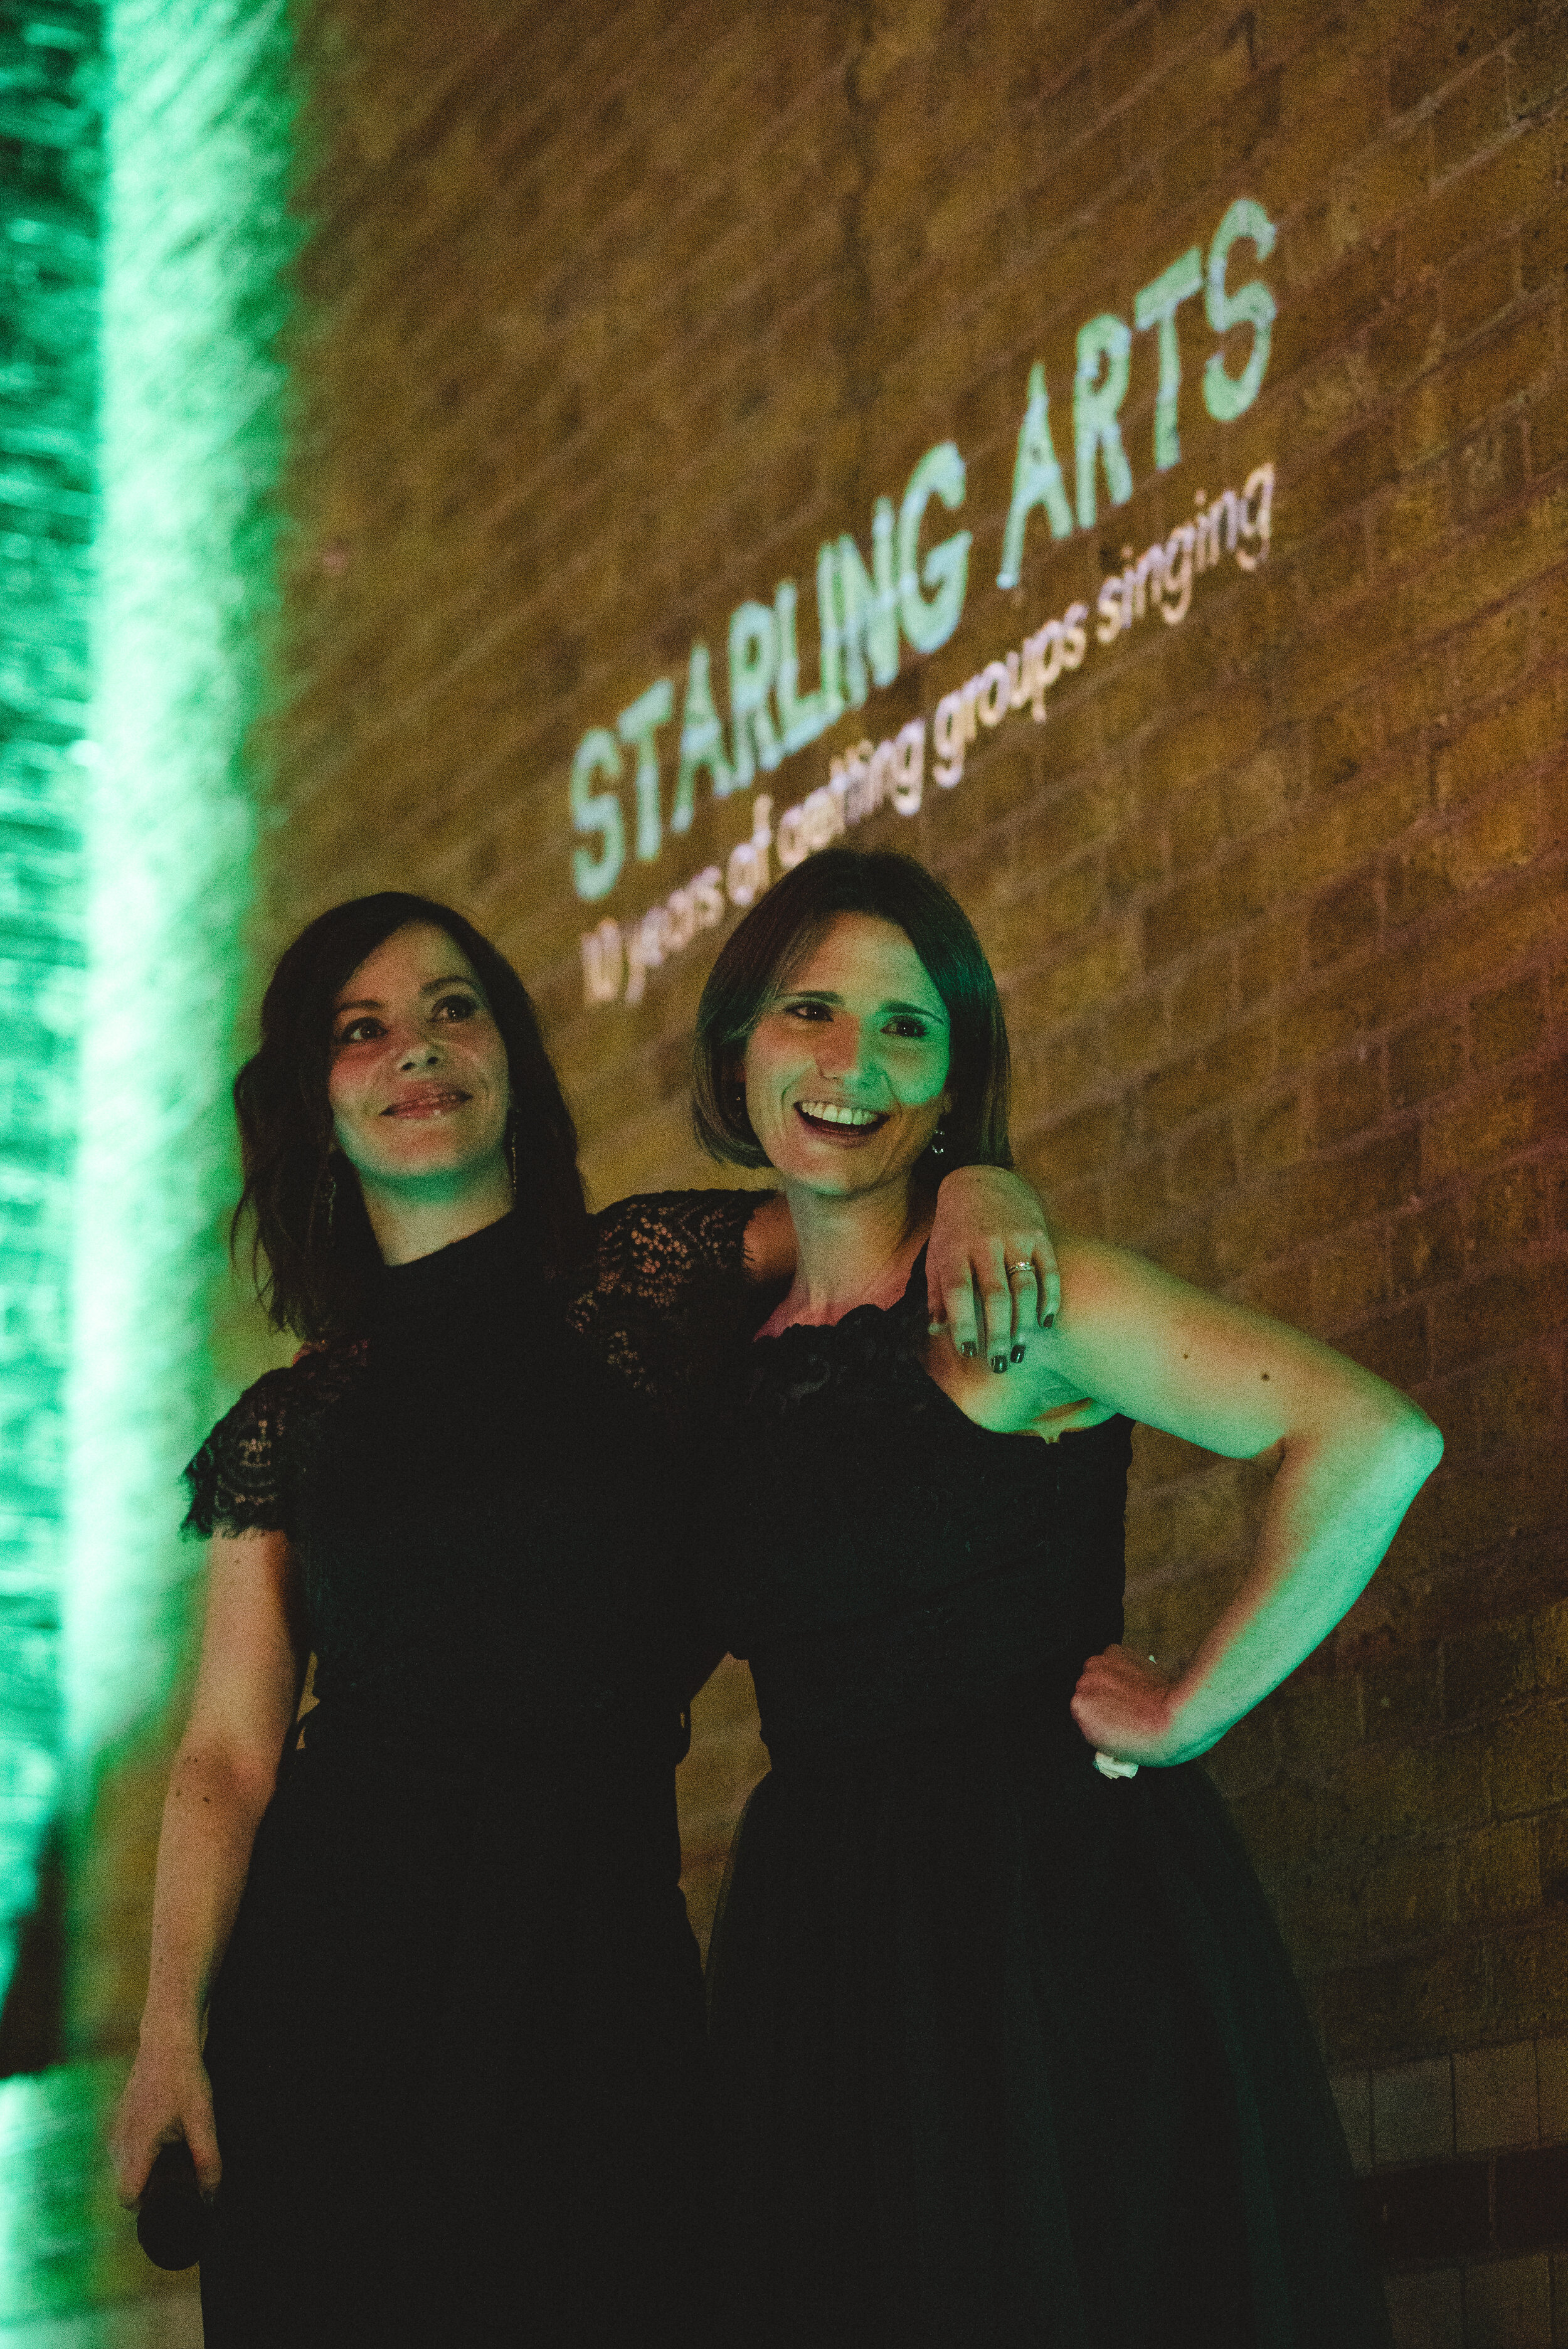 Anna Shields and Emily Garsin of Starling Arts at London's Wheatsheaf Hall. Photo by Alice the Camera